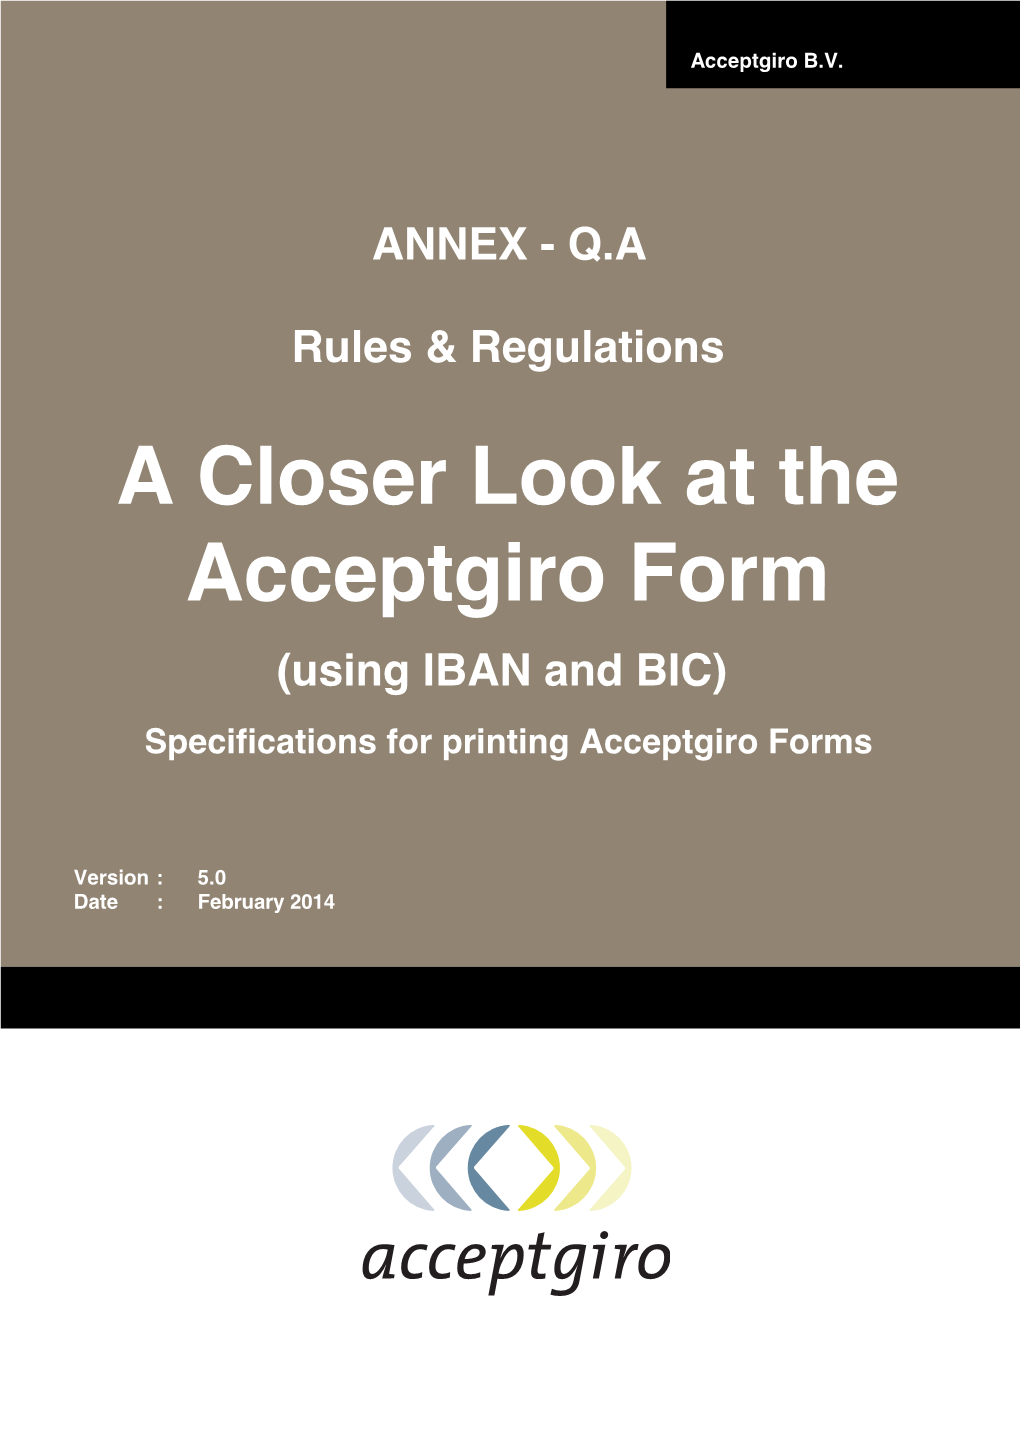 A Closer Look at the Acceptgiro Form (Using IBAN and BIC) Specifications for Printing Acceptgiro Forms